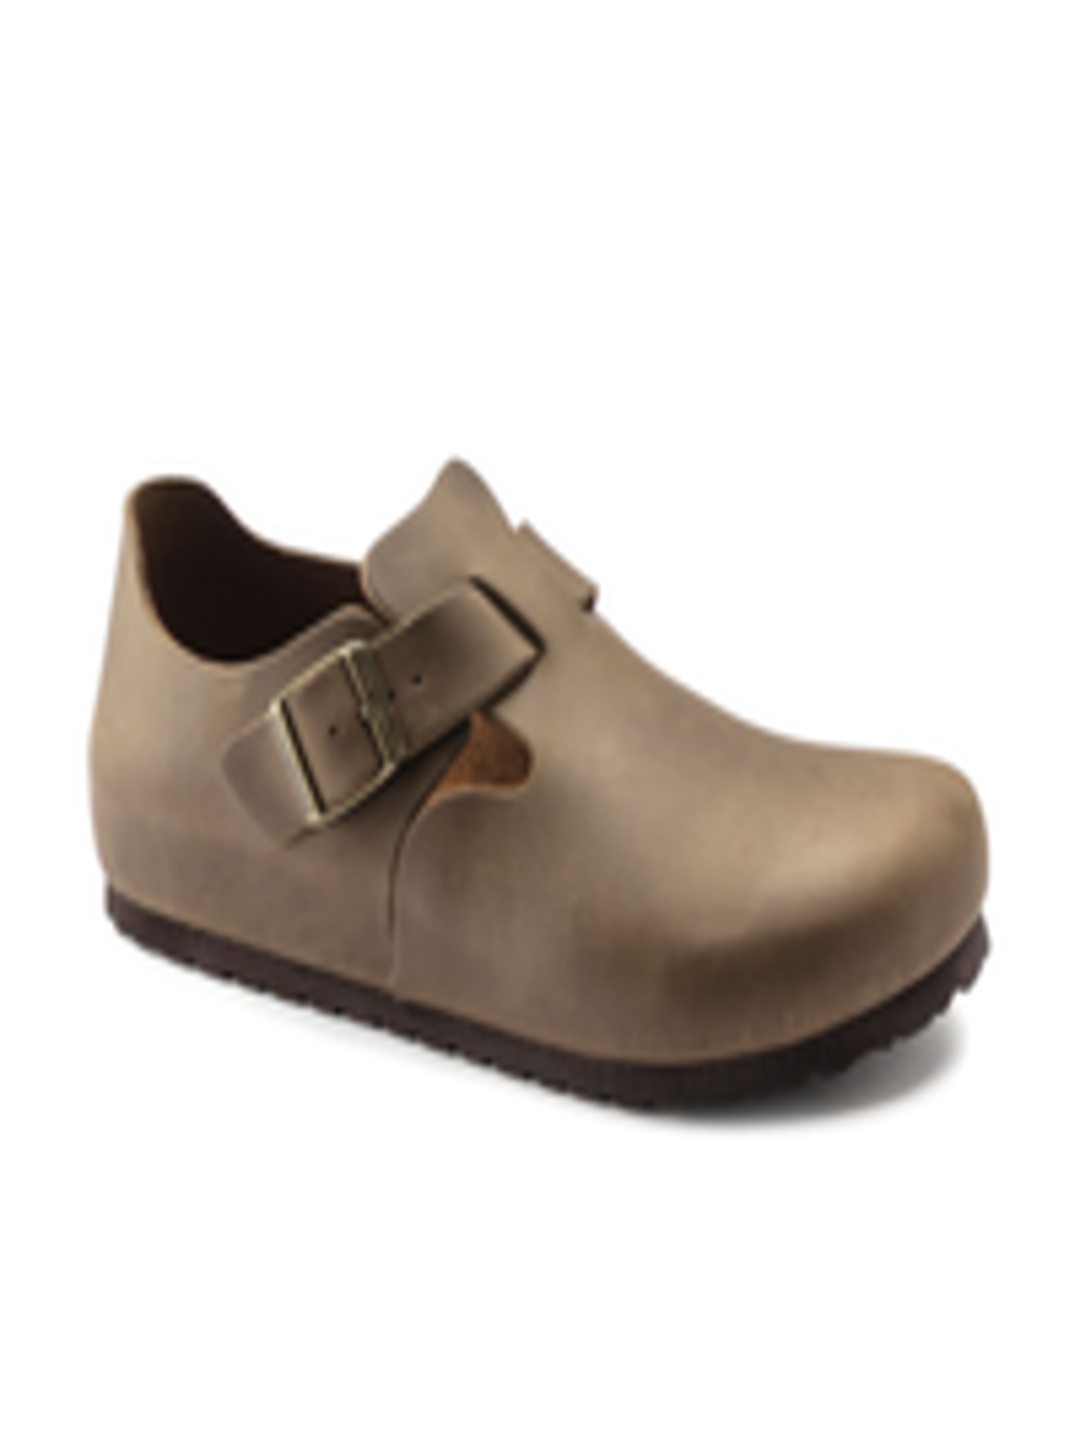 Buy Birkenstock Unisex Brown Patent Leather Clogs - Casual Shoes for